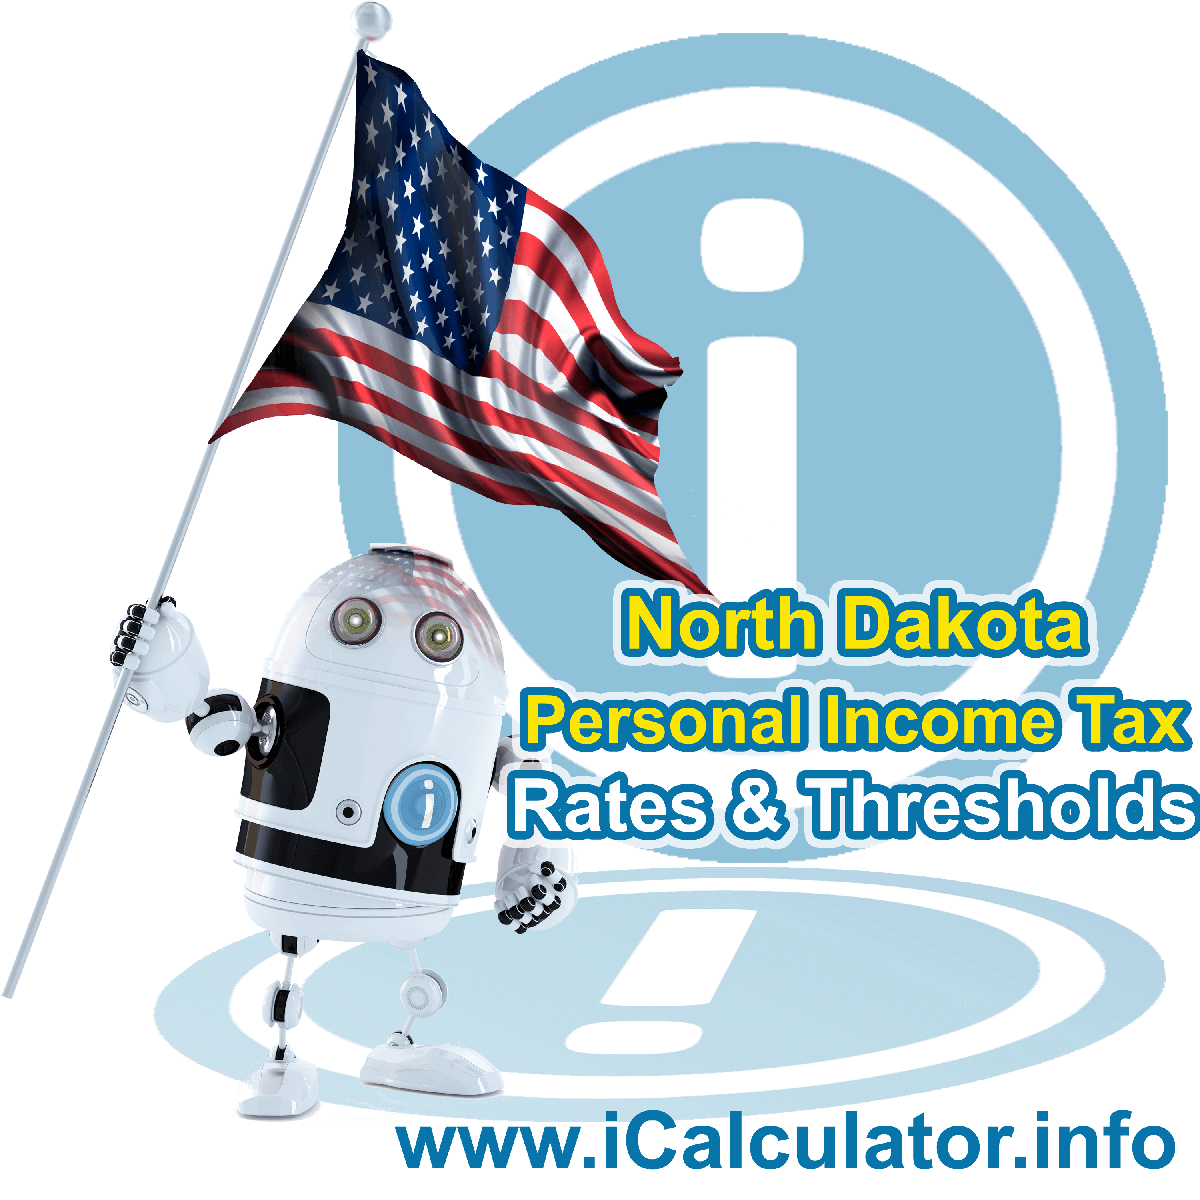 North Dakota State Tax Tables 2015. This image displays details of the North Dakota State Tax Tables for the 2015 tax return year which is provided in support of the 2015 US Tax Calculator